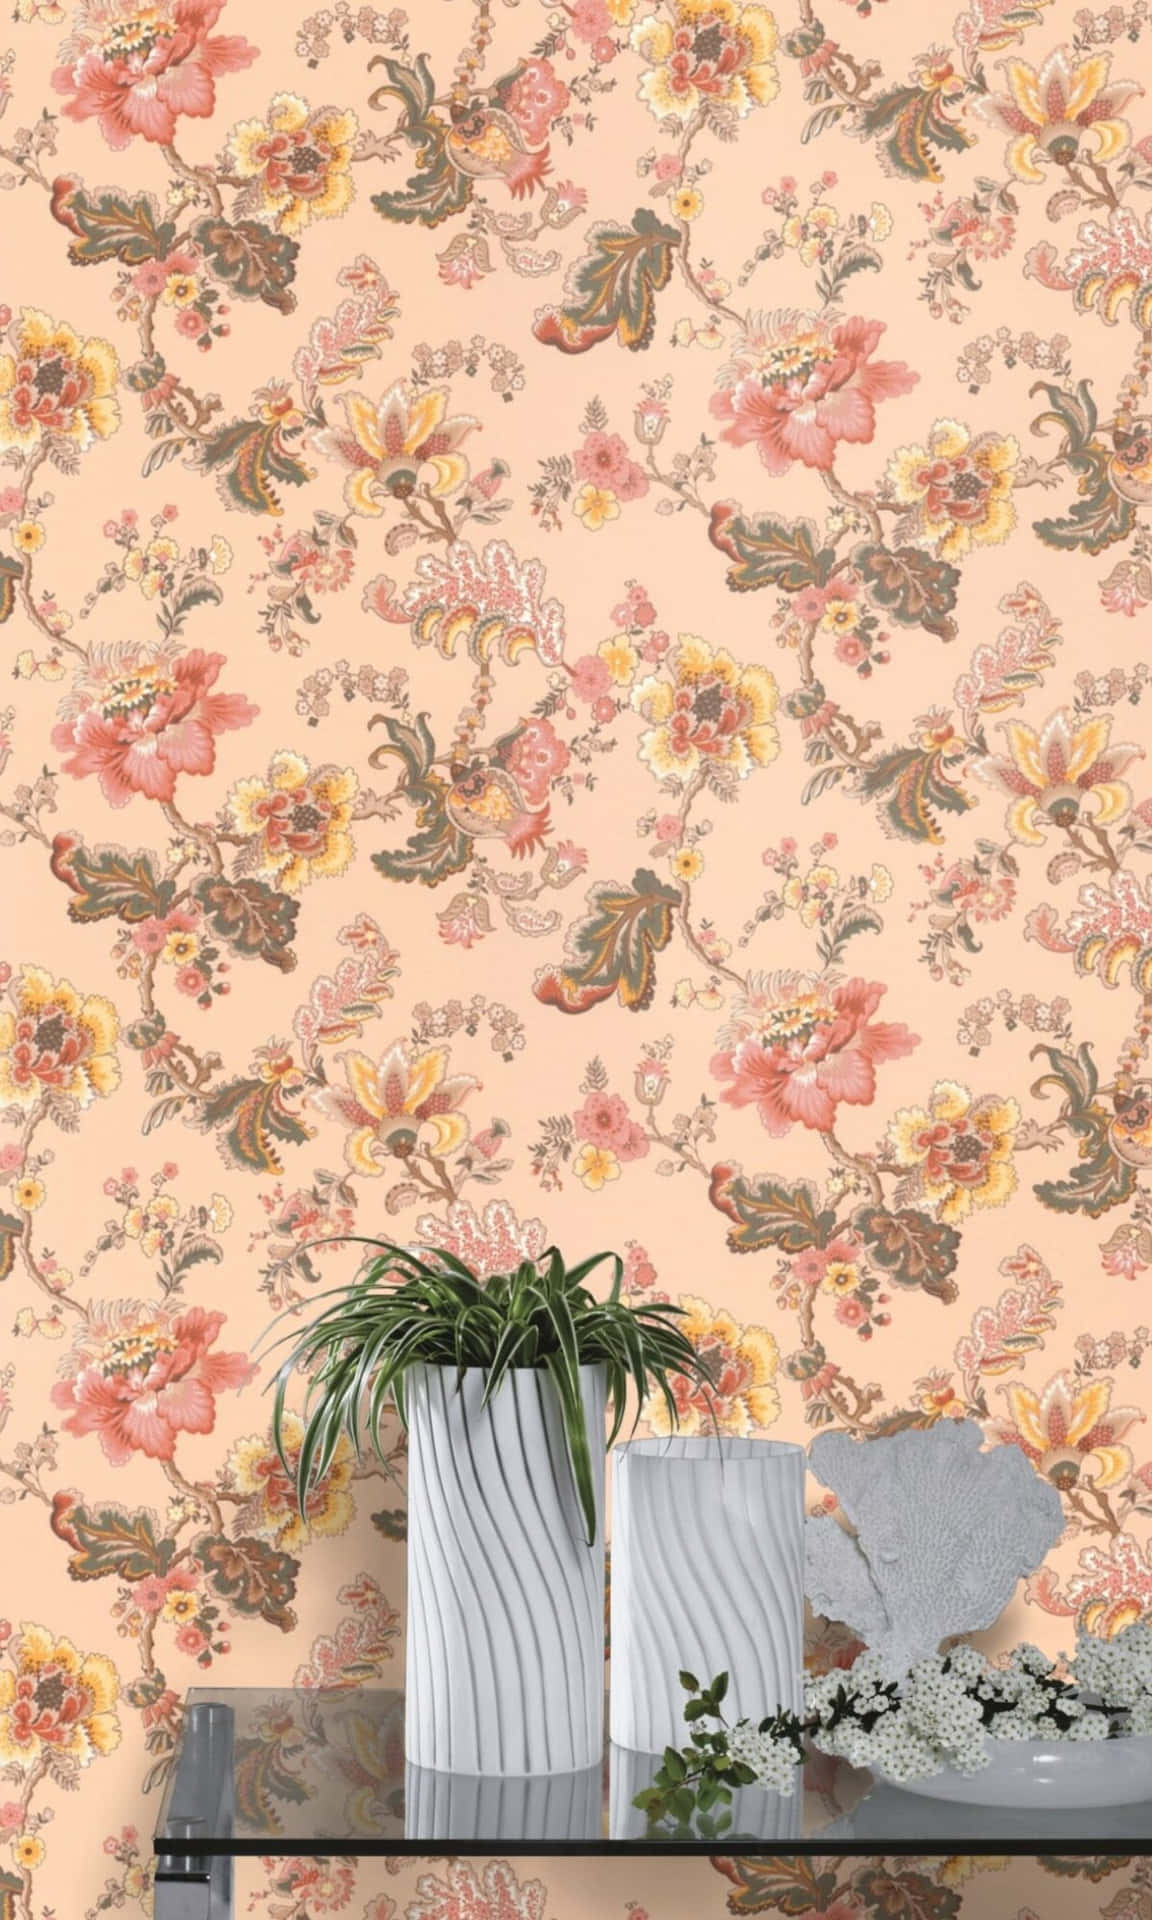 Flaunt your love for all things pink and floral with this beautiful wallpaper! Wallpaper